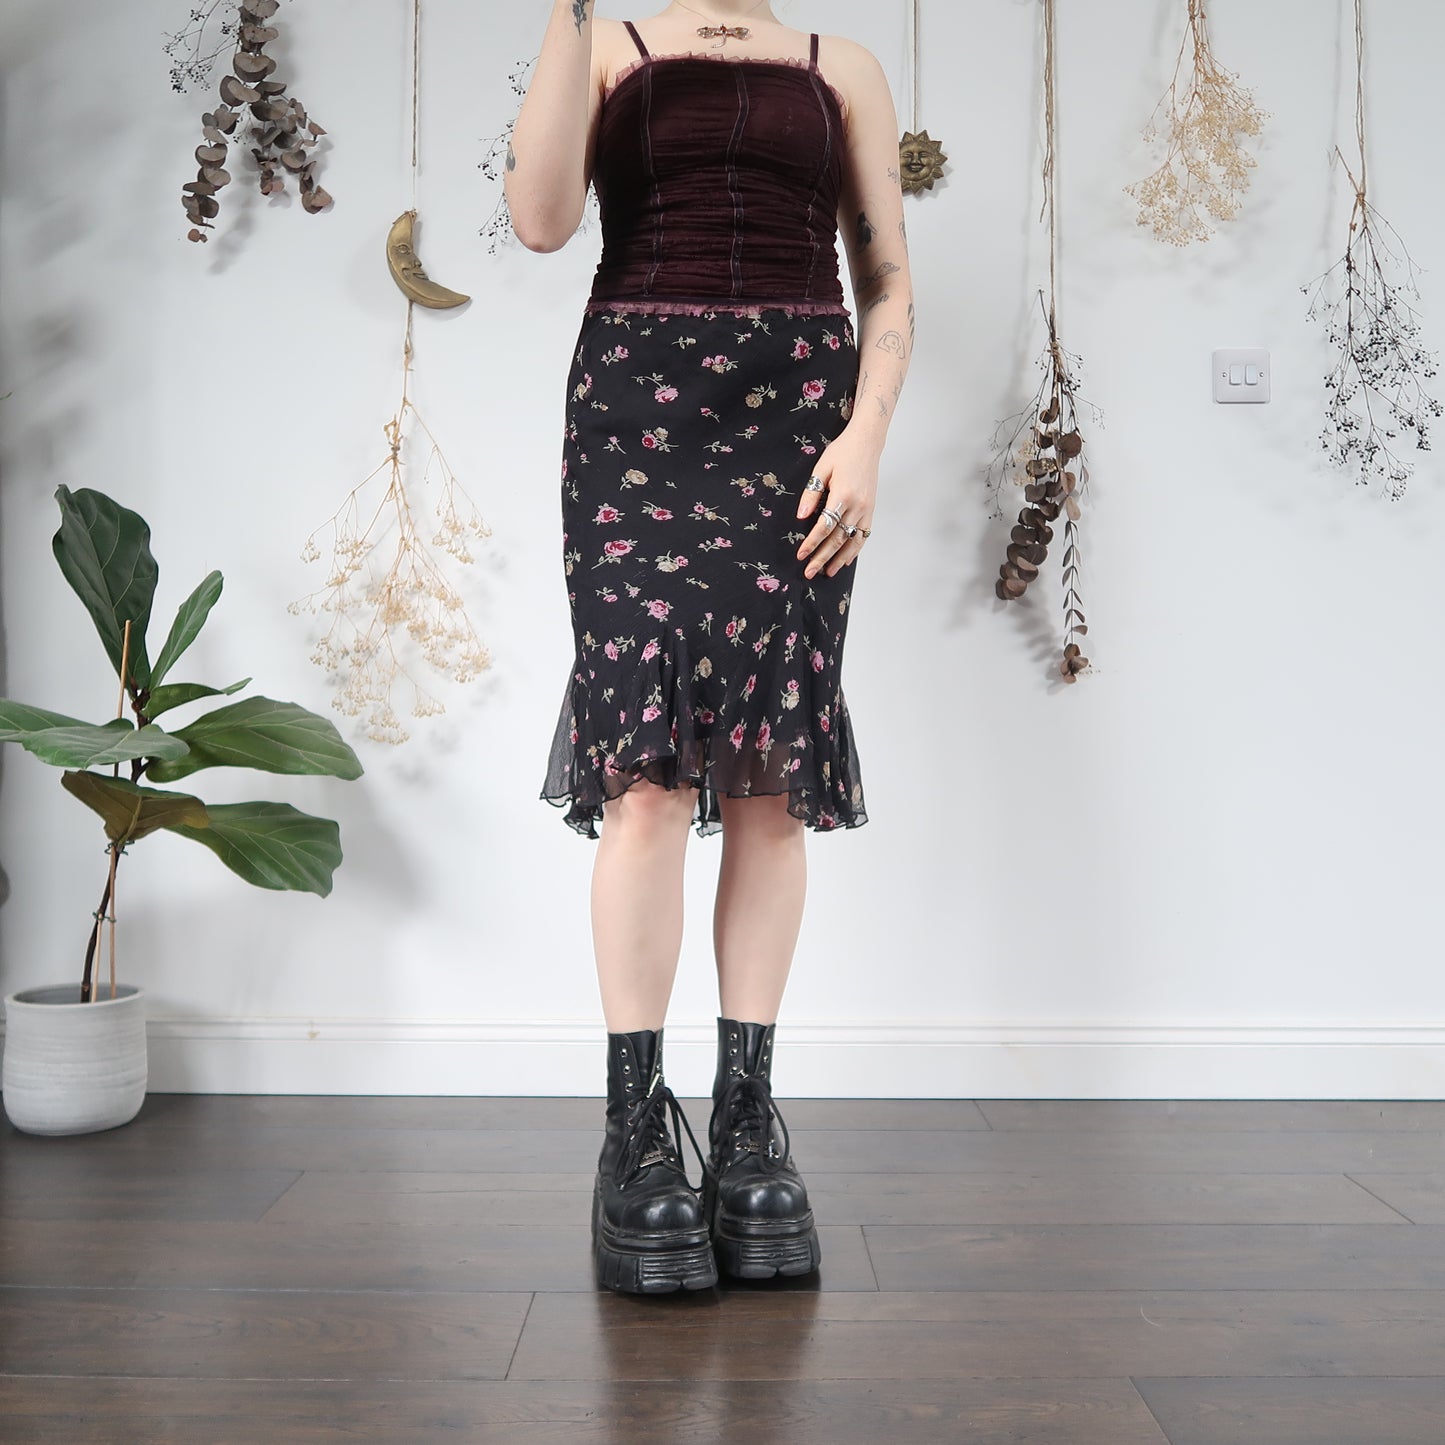 Floral silk skirt - size XS/S